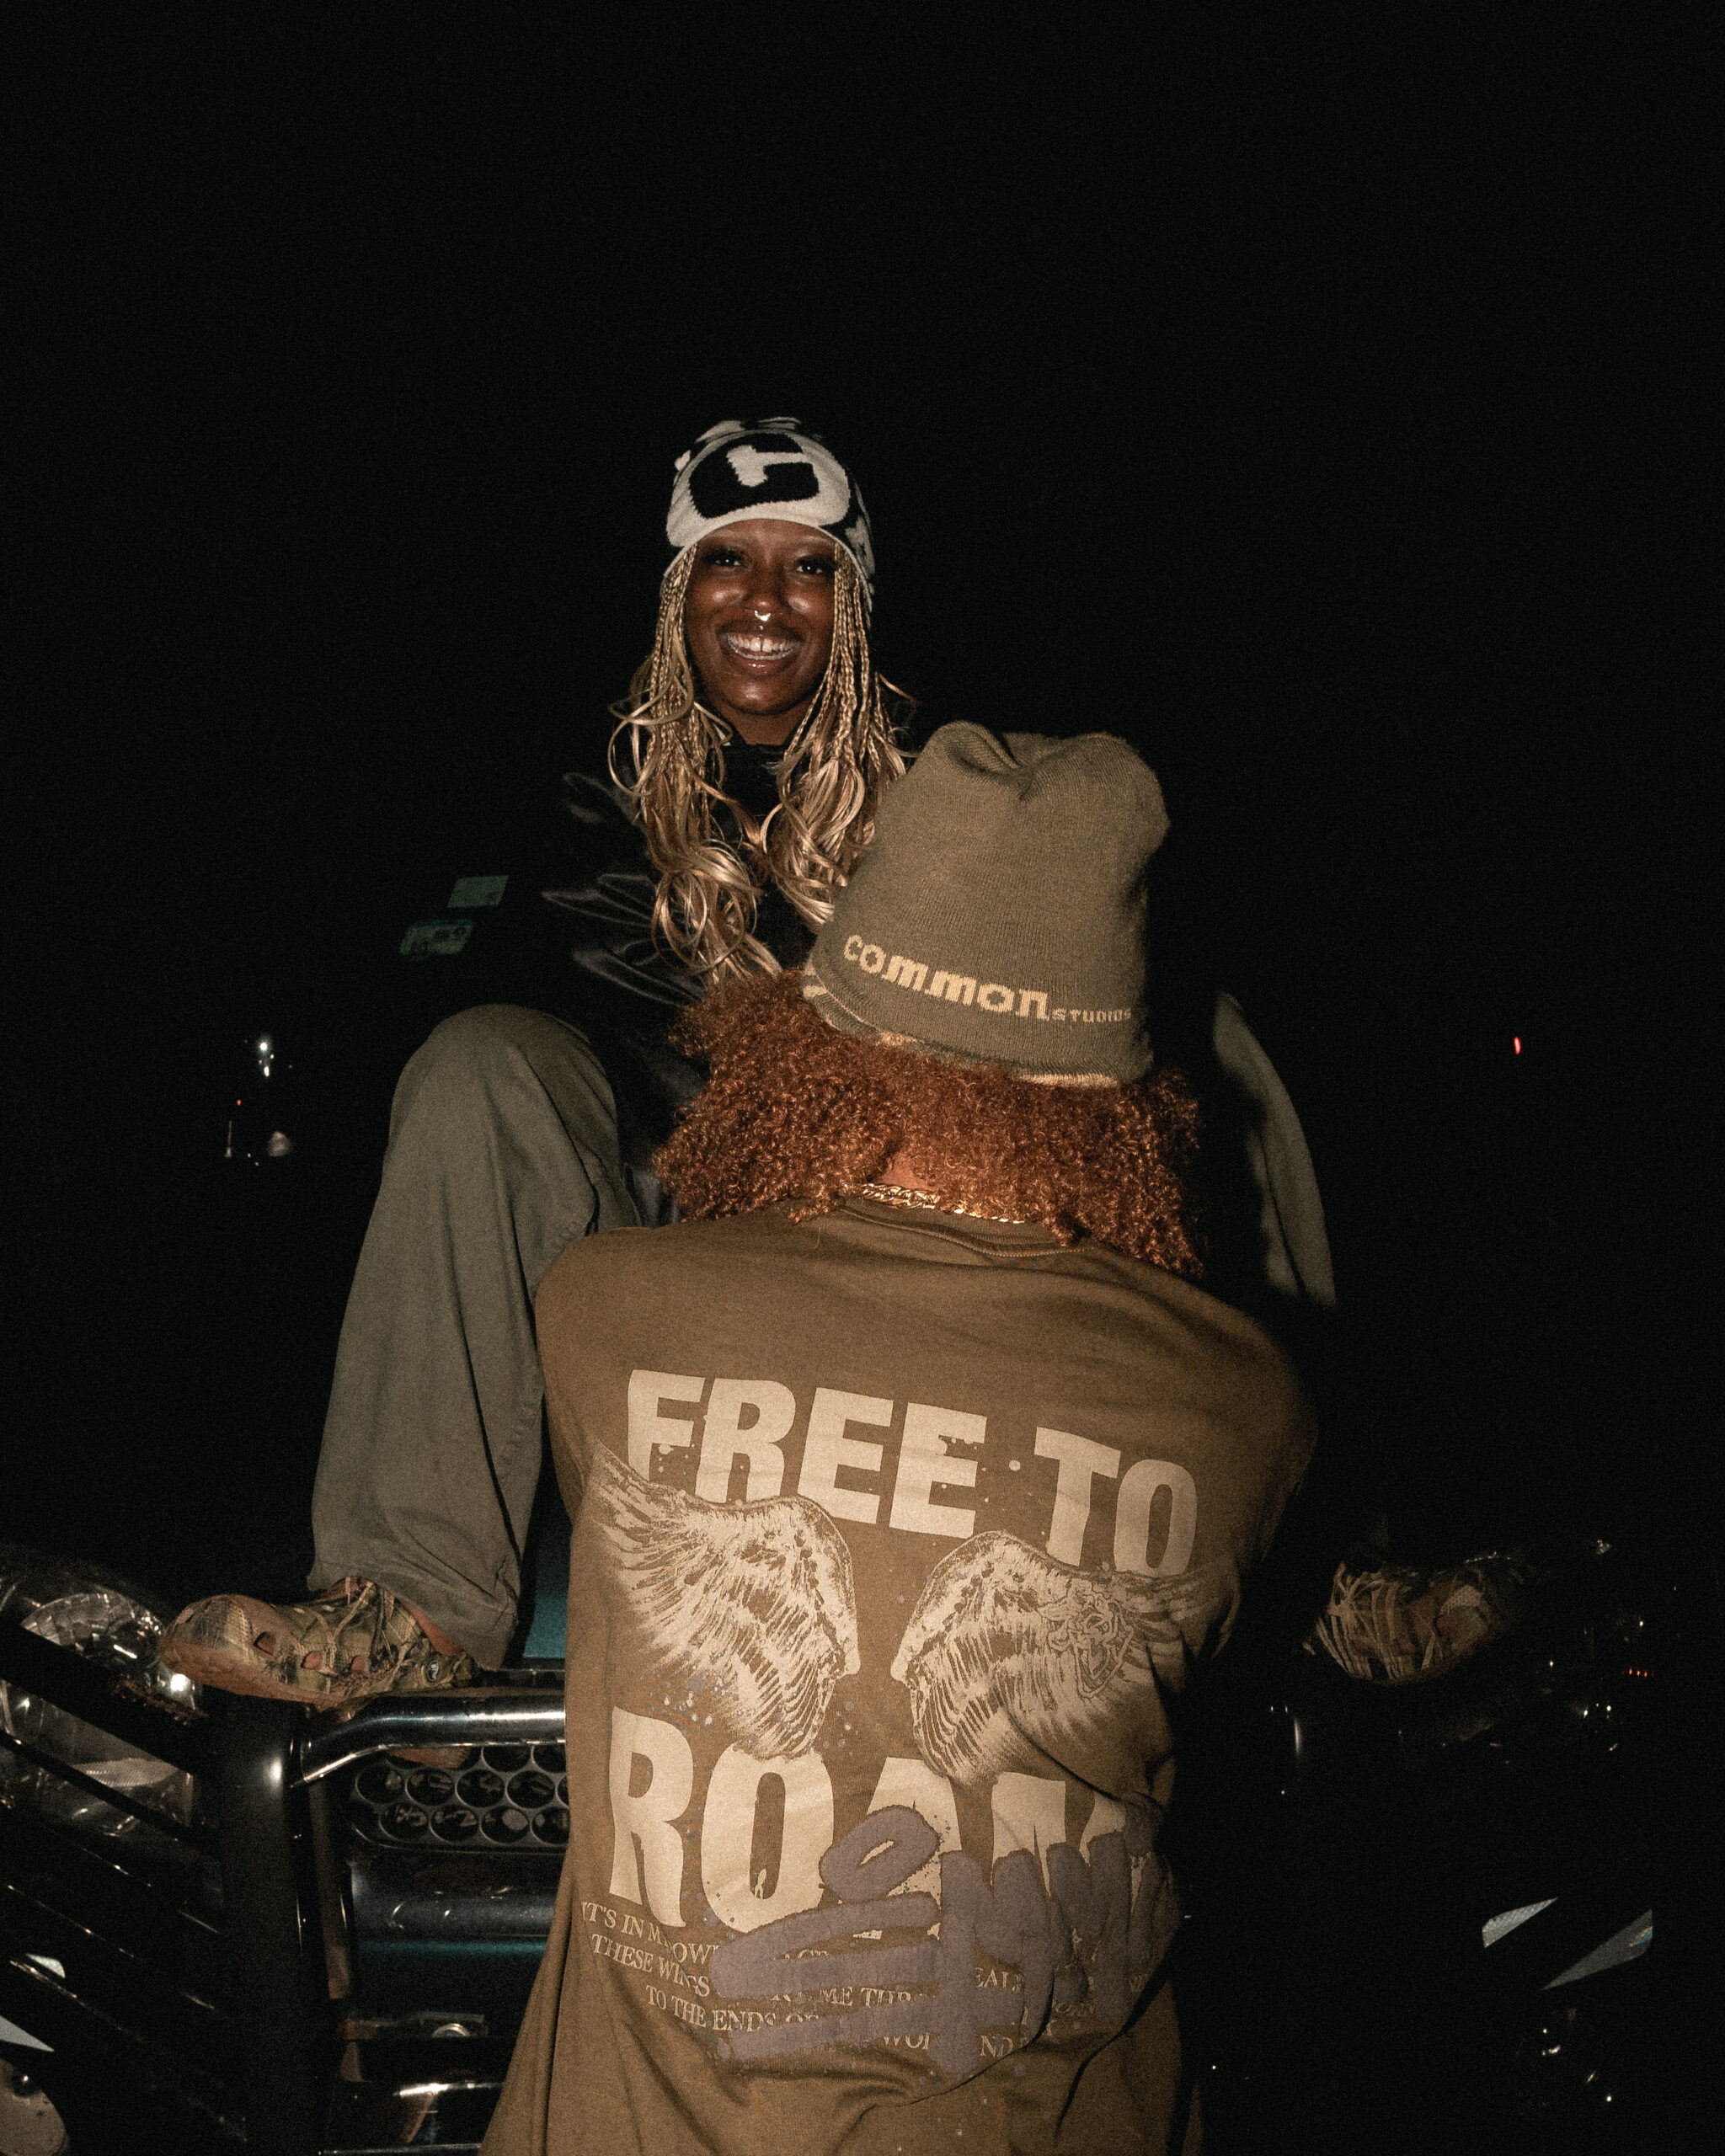 COMMON FTR Celebrates Creative Freedom and Youth Culture in Their New Campaign